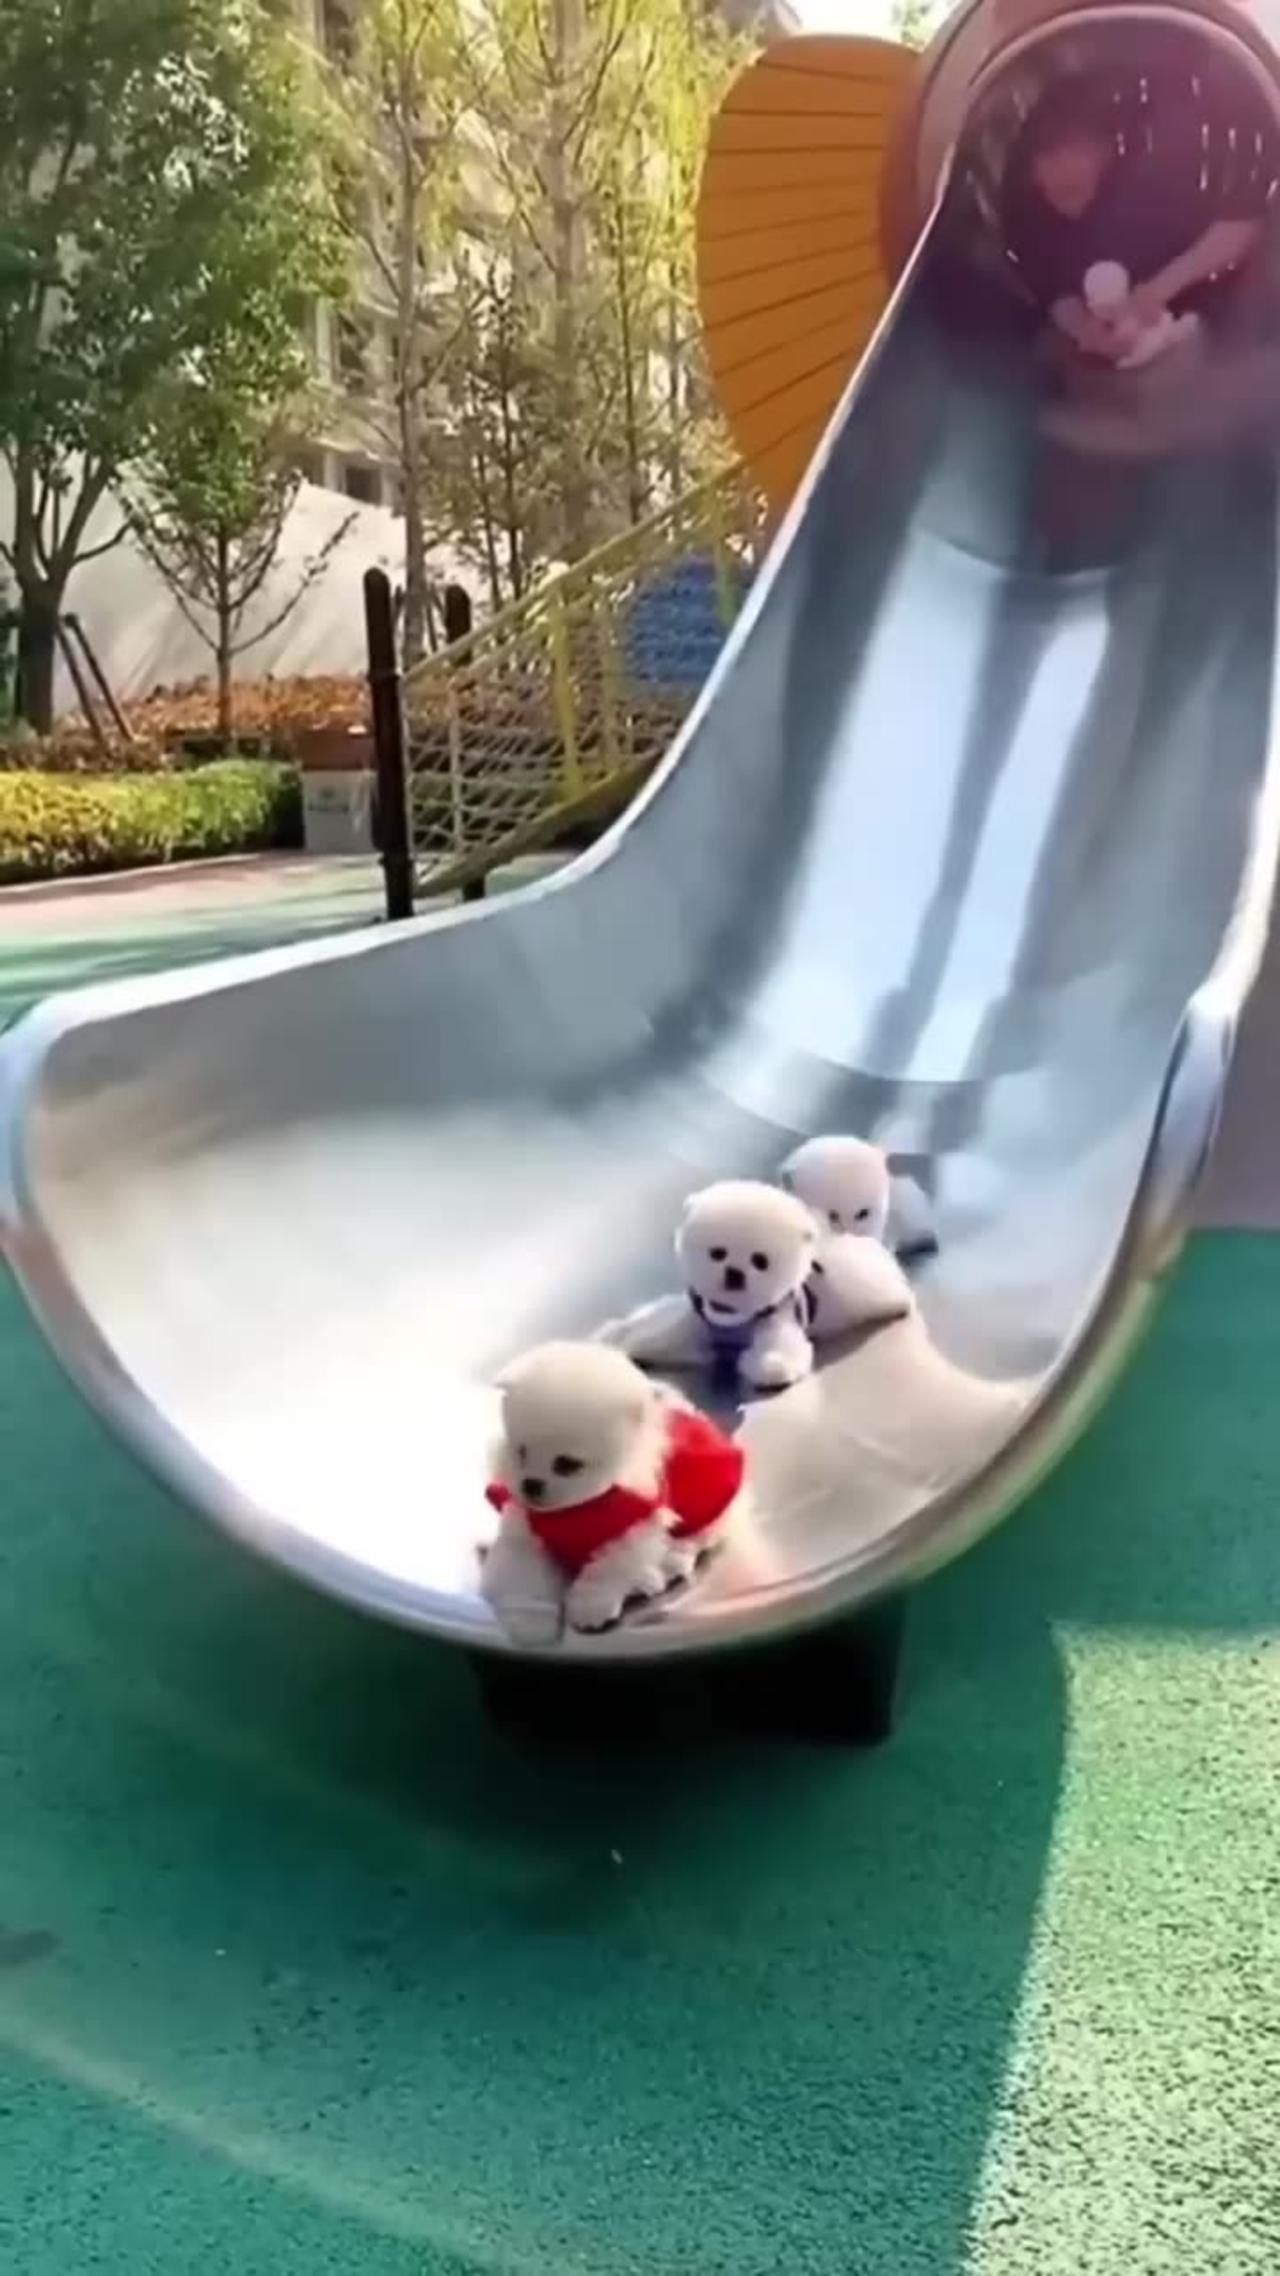 Fun and cute puppies